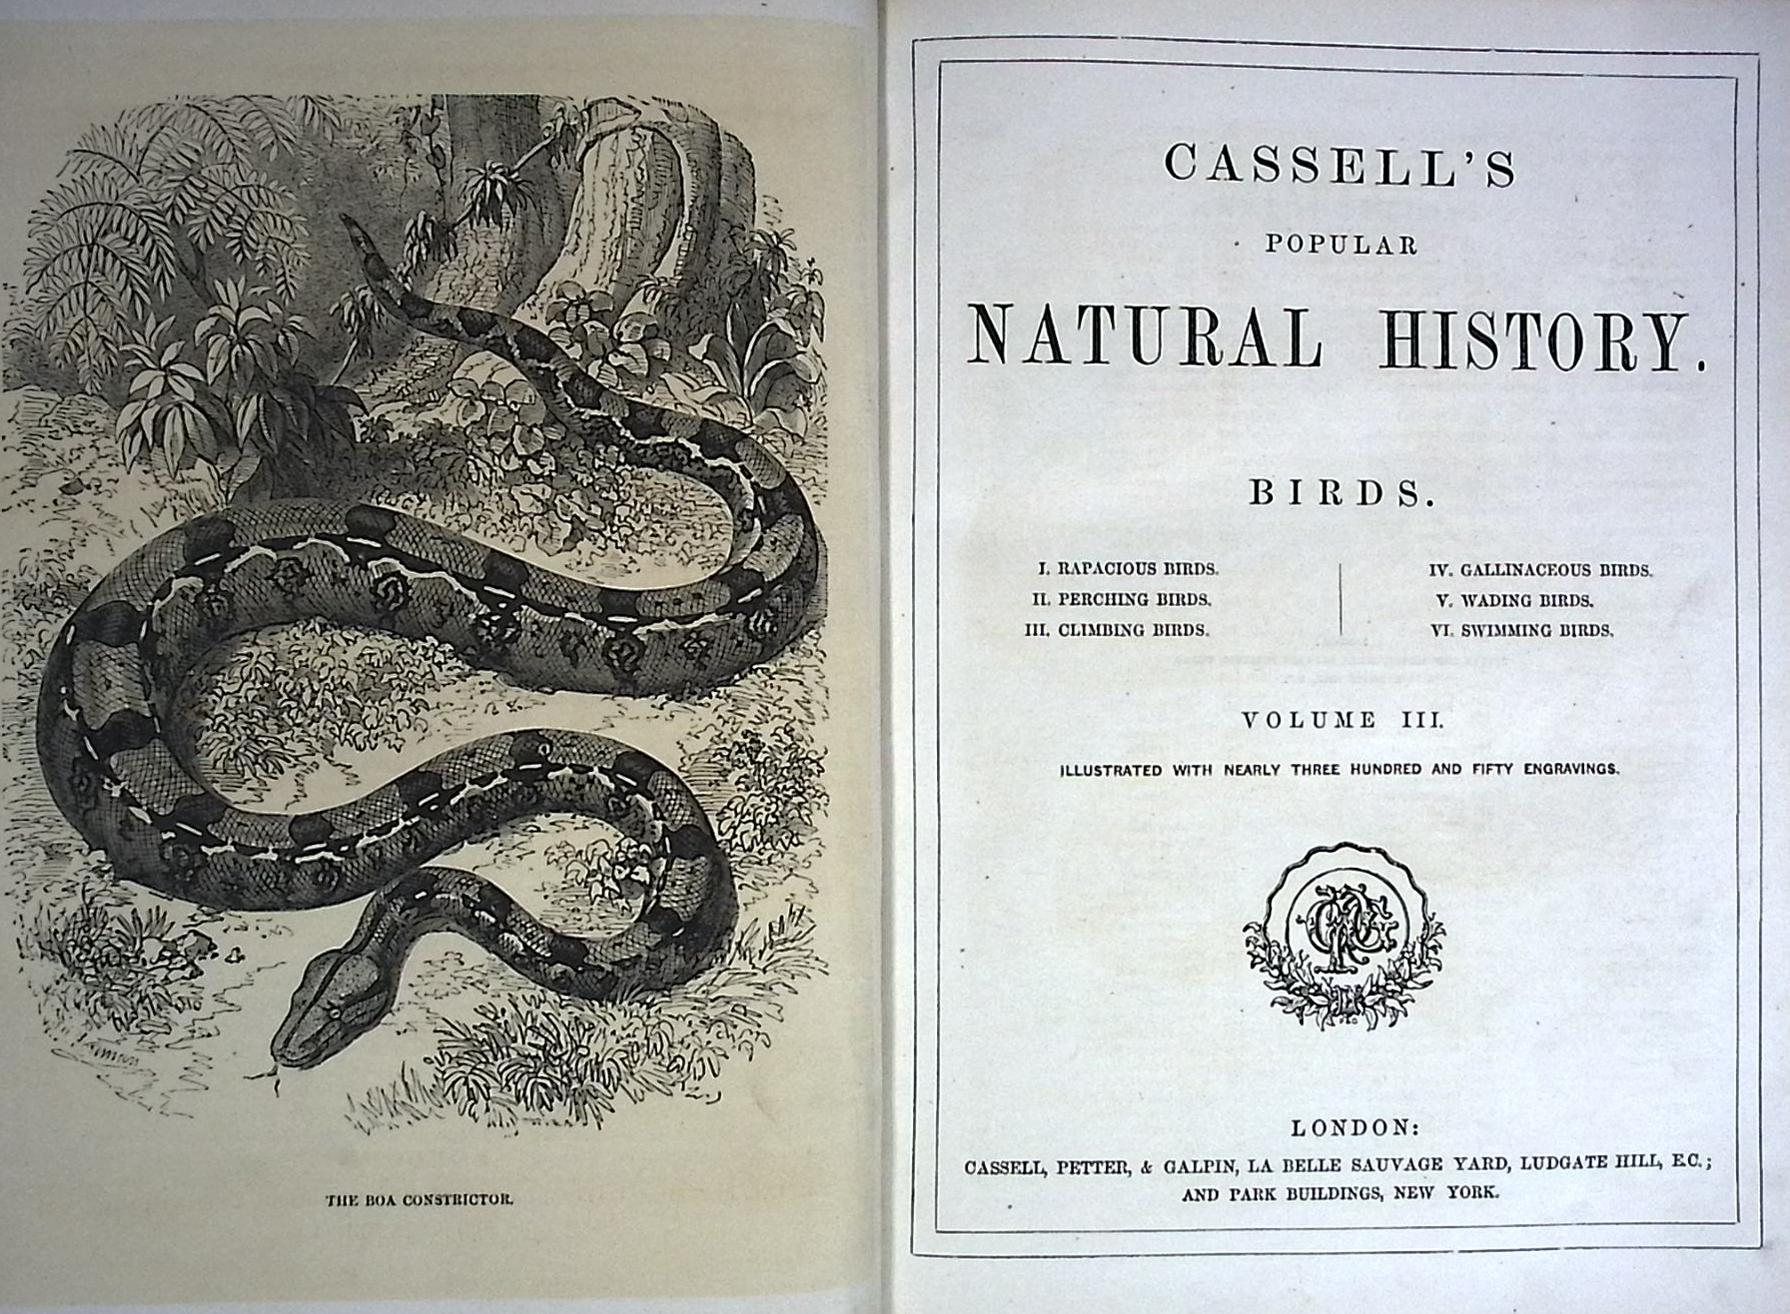 Cassell's Popular Natural History. Four volumes bound in two.